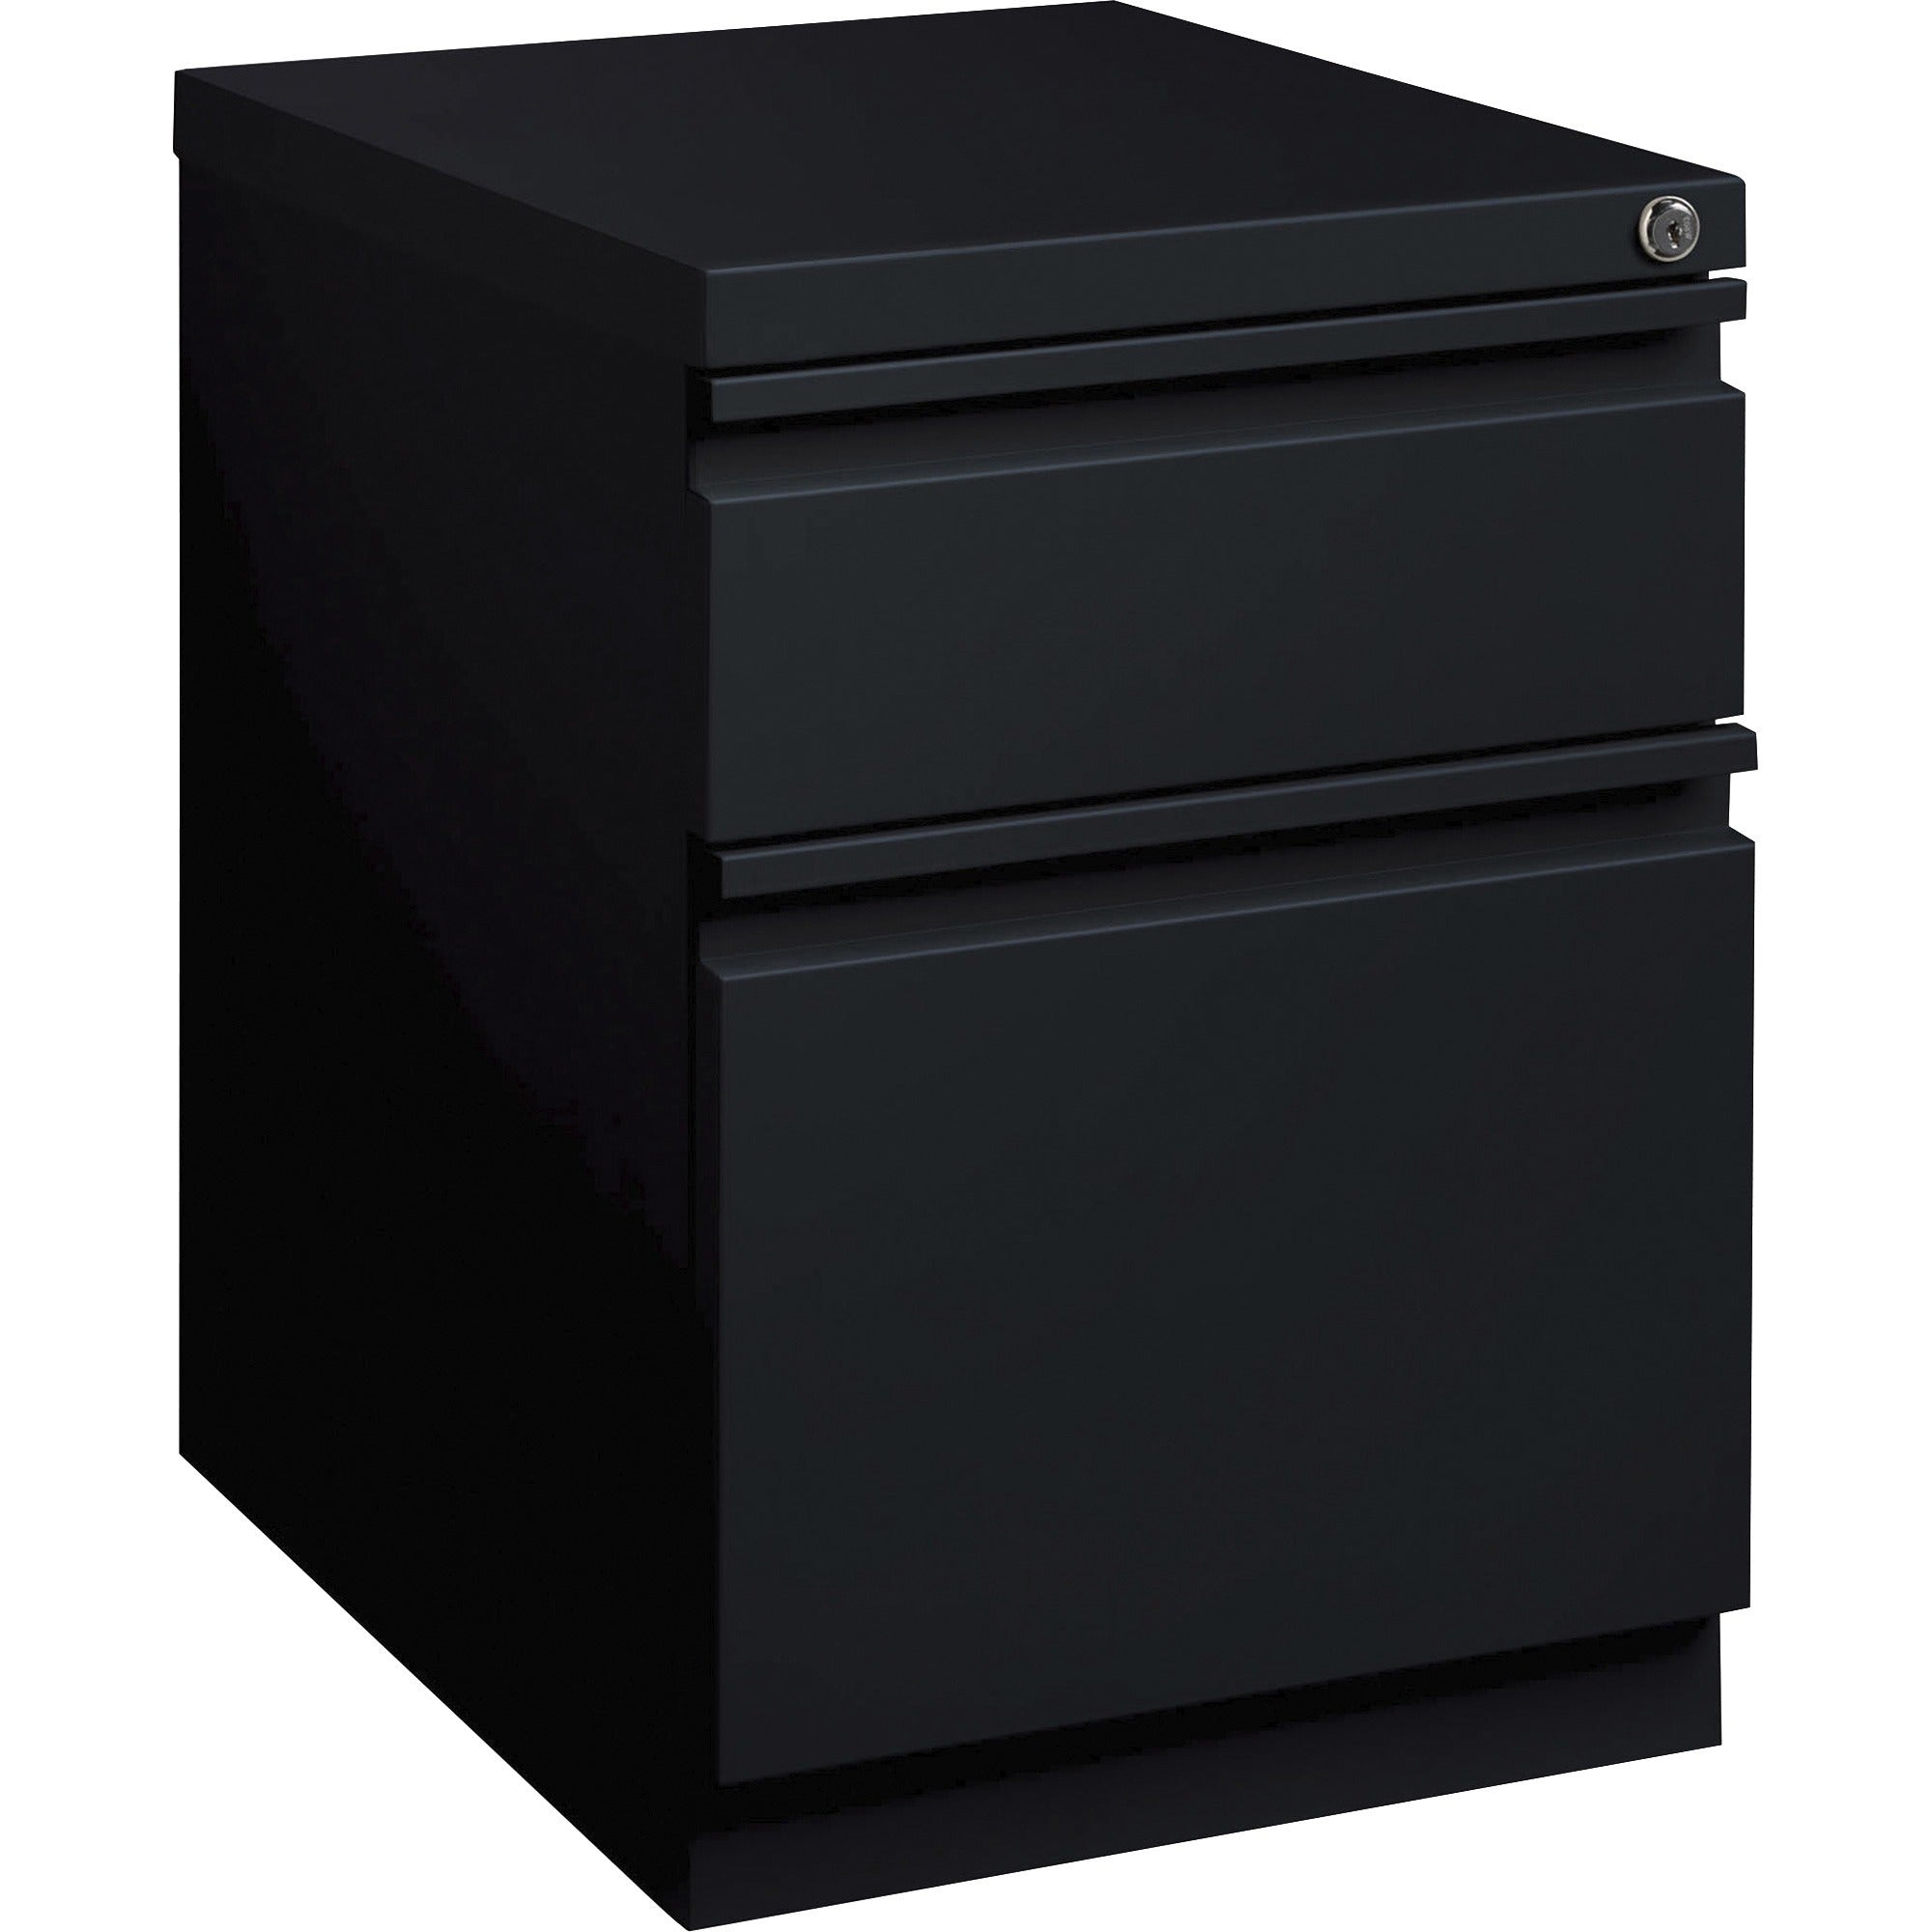 lorell-20-box-file-mobile-pedestal-15-x-199-x-238-for-box-file-letter-mobility-ball-bearing-suspension-removable-lock-pull-out-drawer-recessed-drawer-anti-tip-casters-key-lock-black-steel-recycled_llr00055 - 1